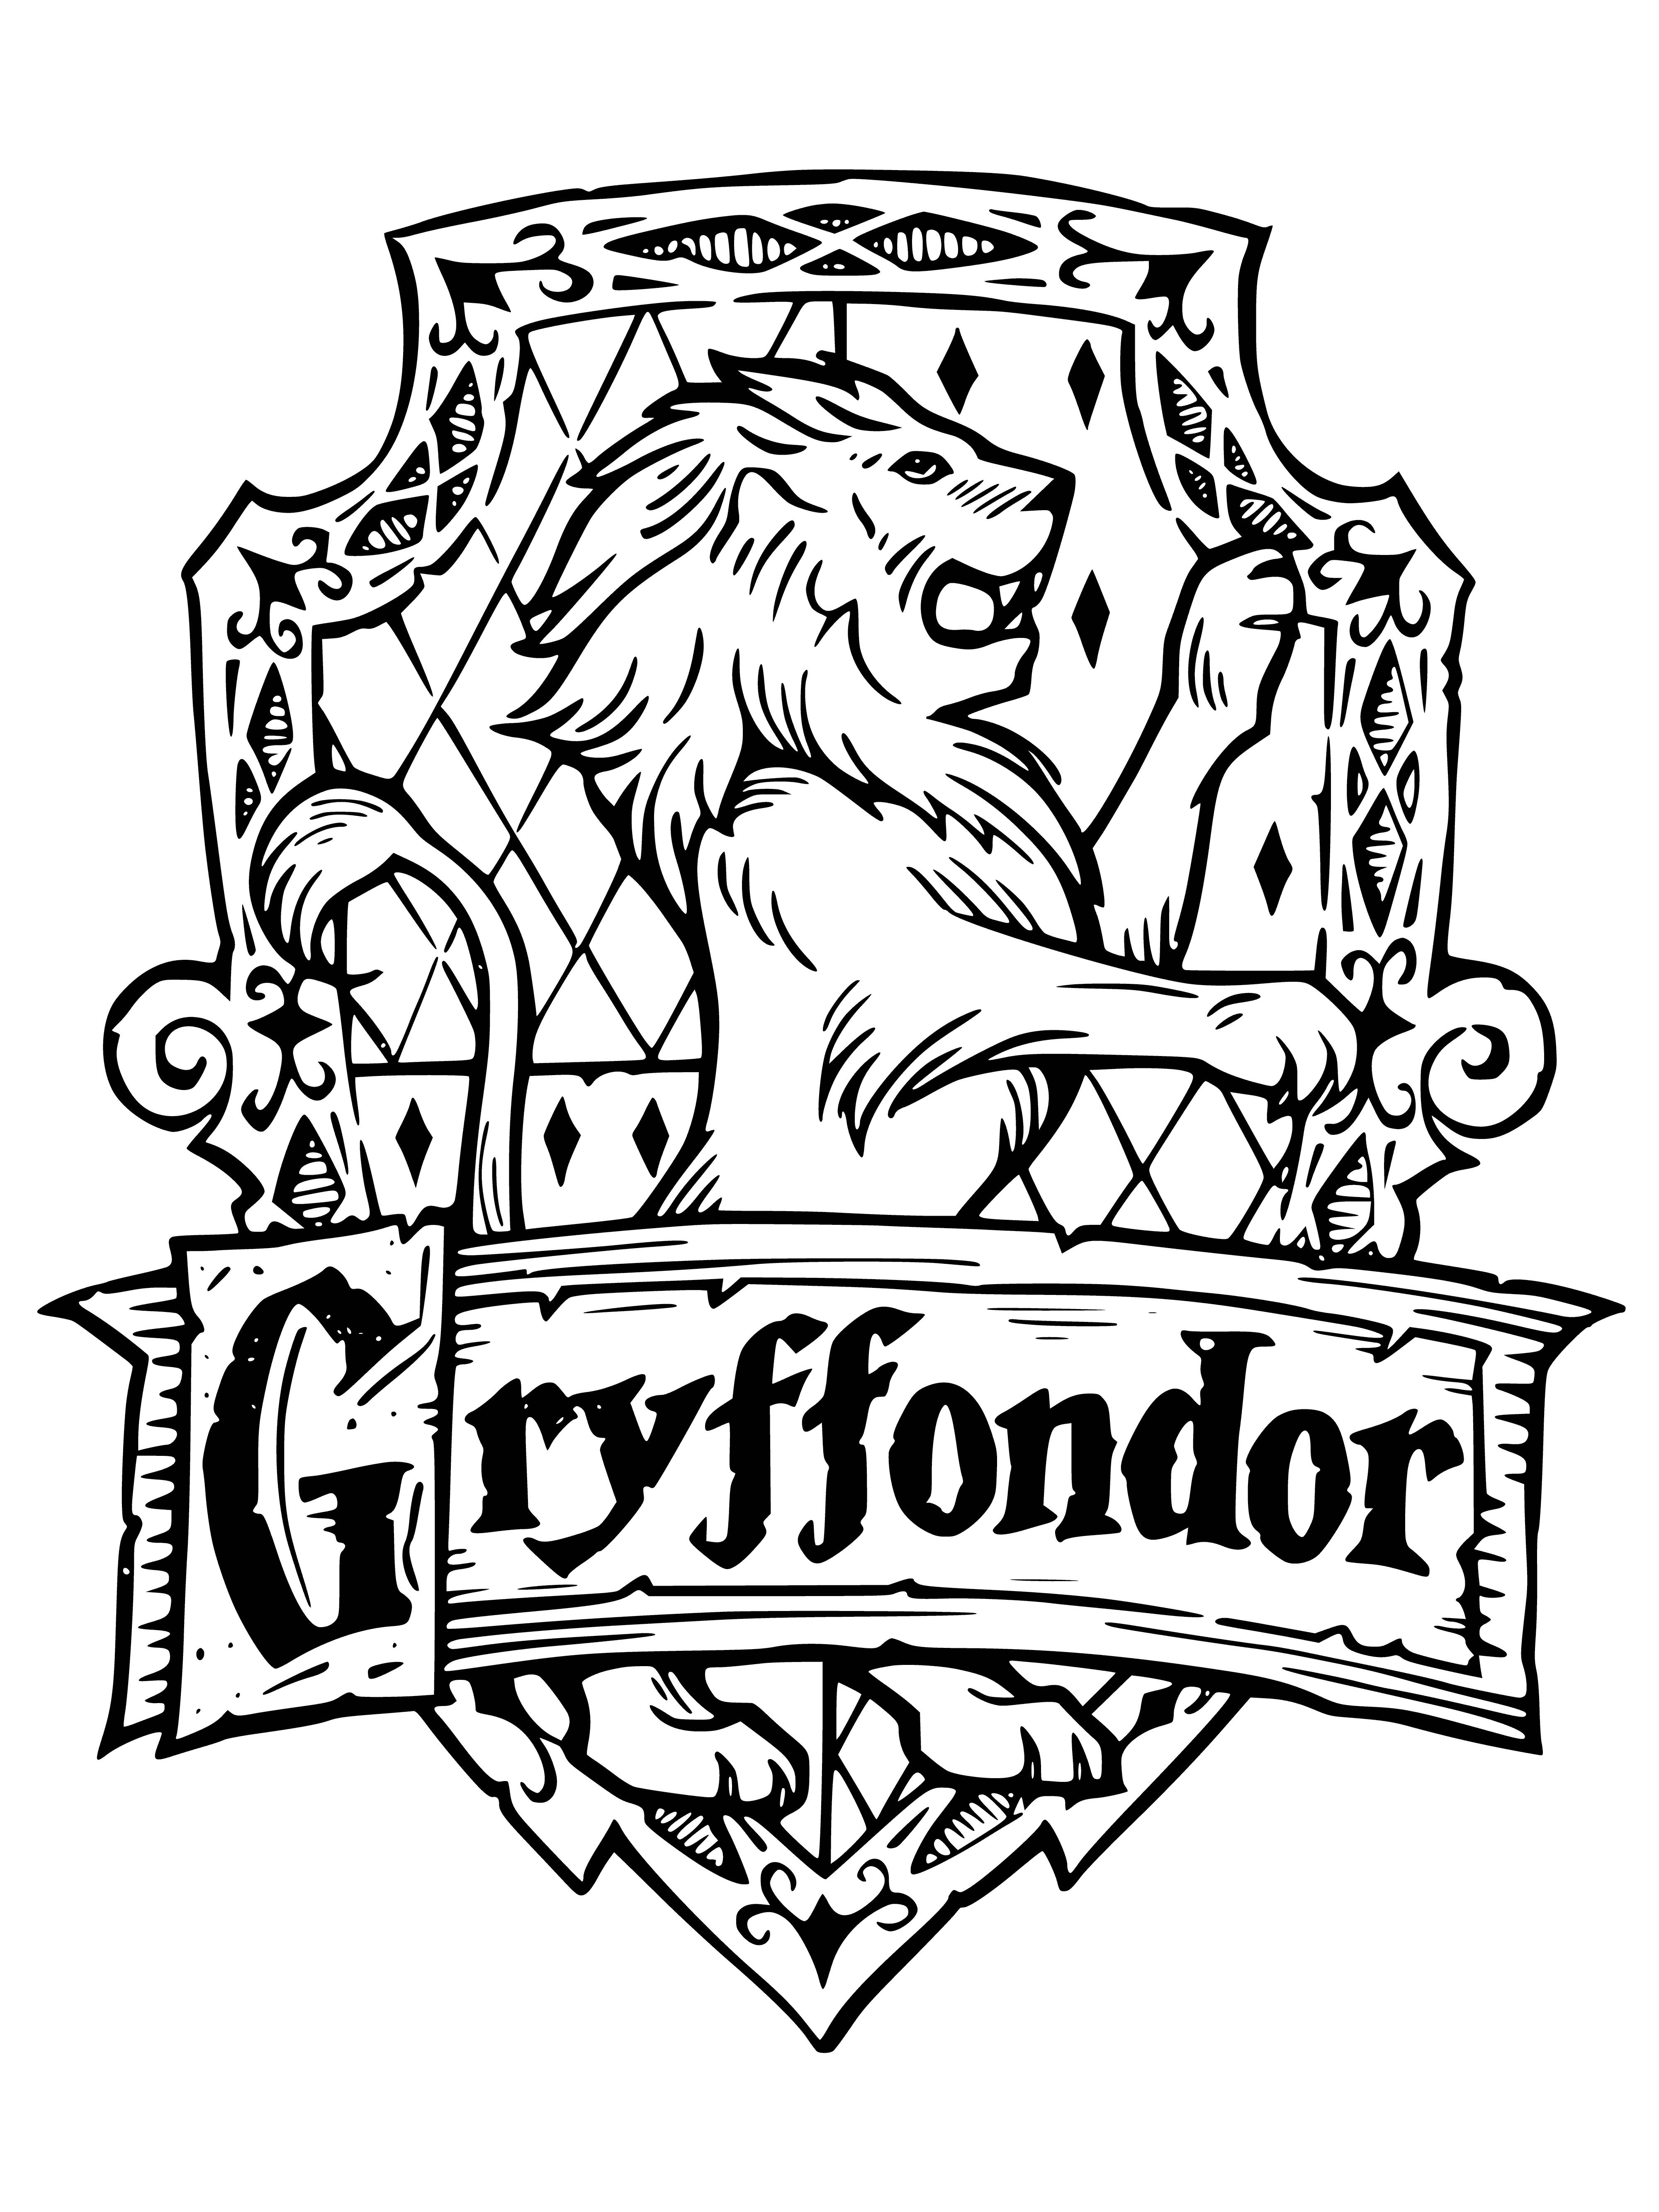 Gryffindor house coat of arms coloring page